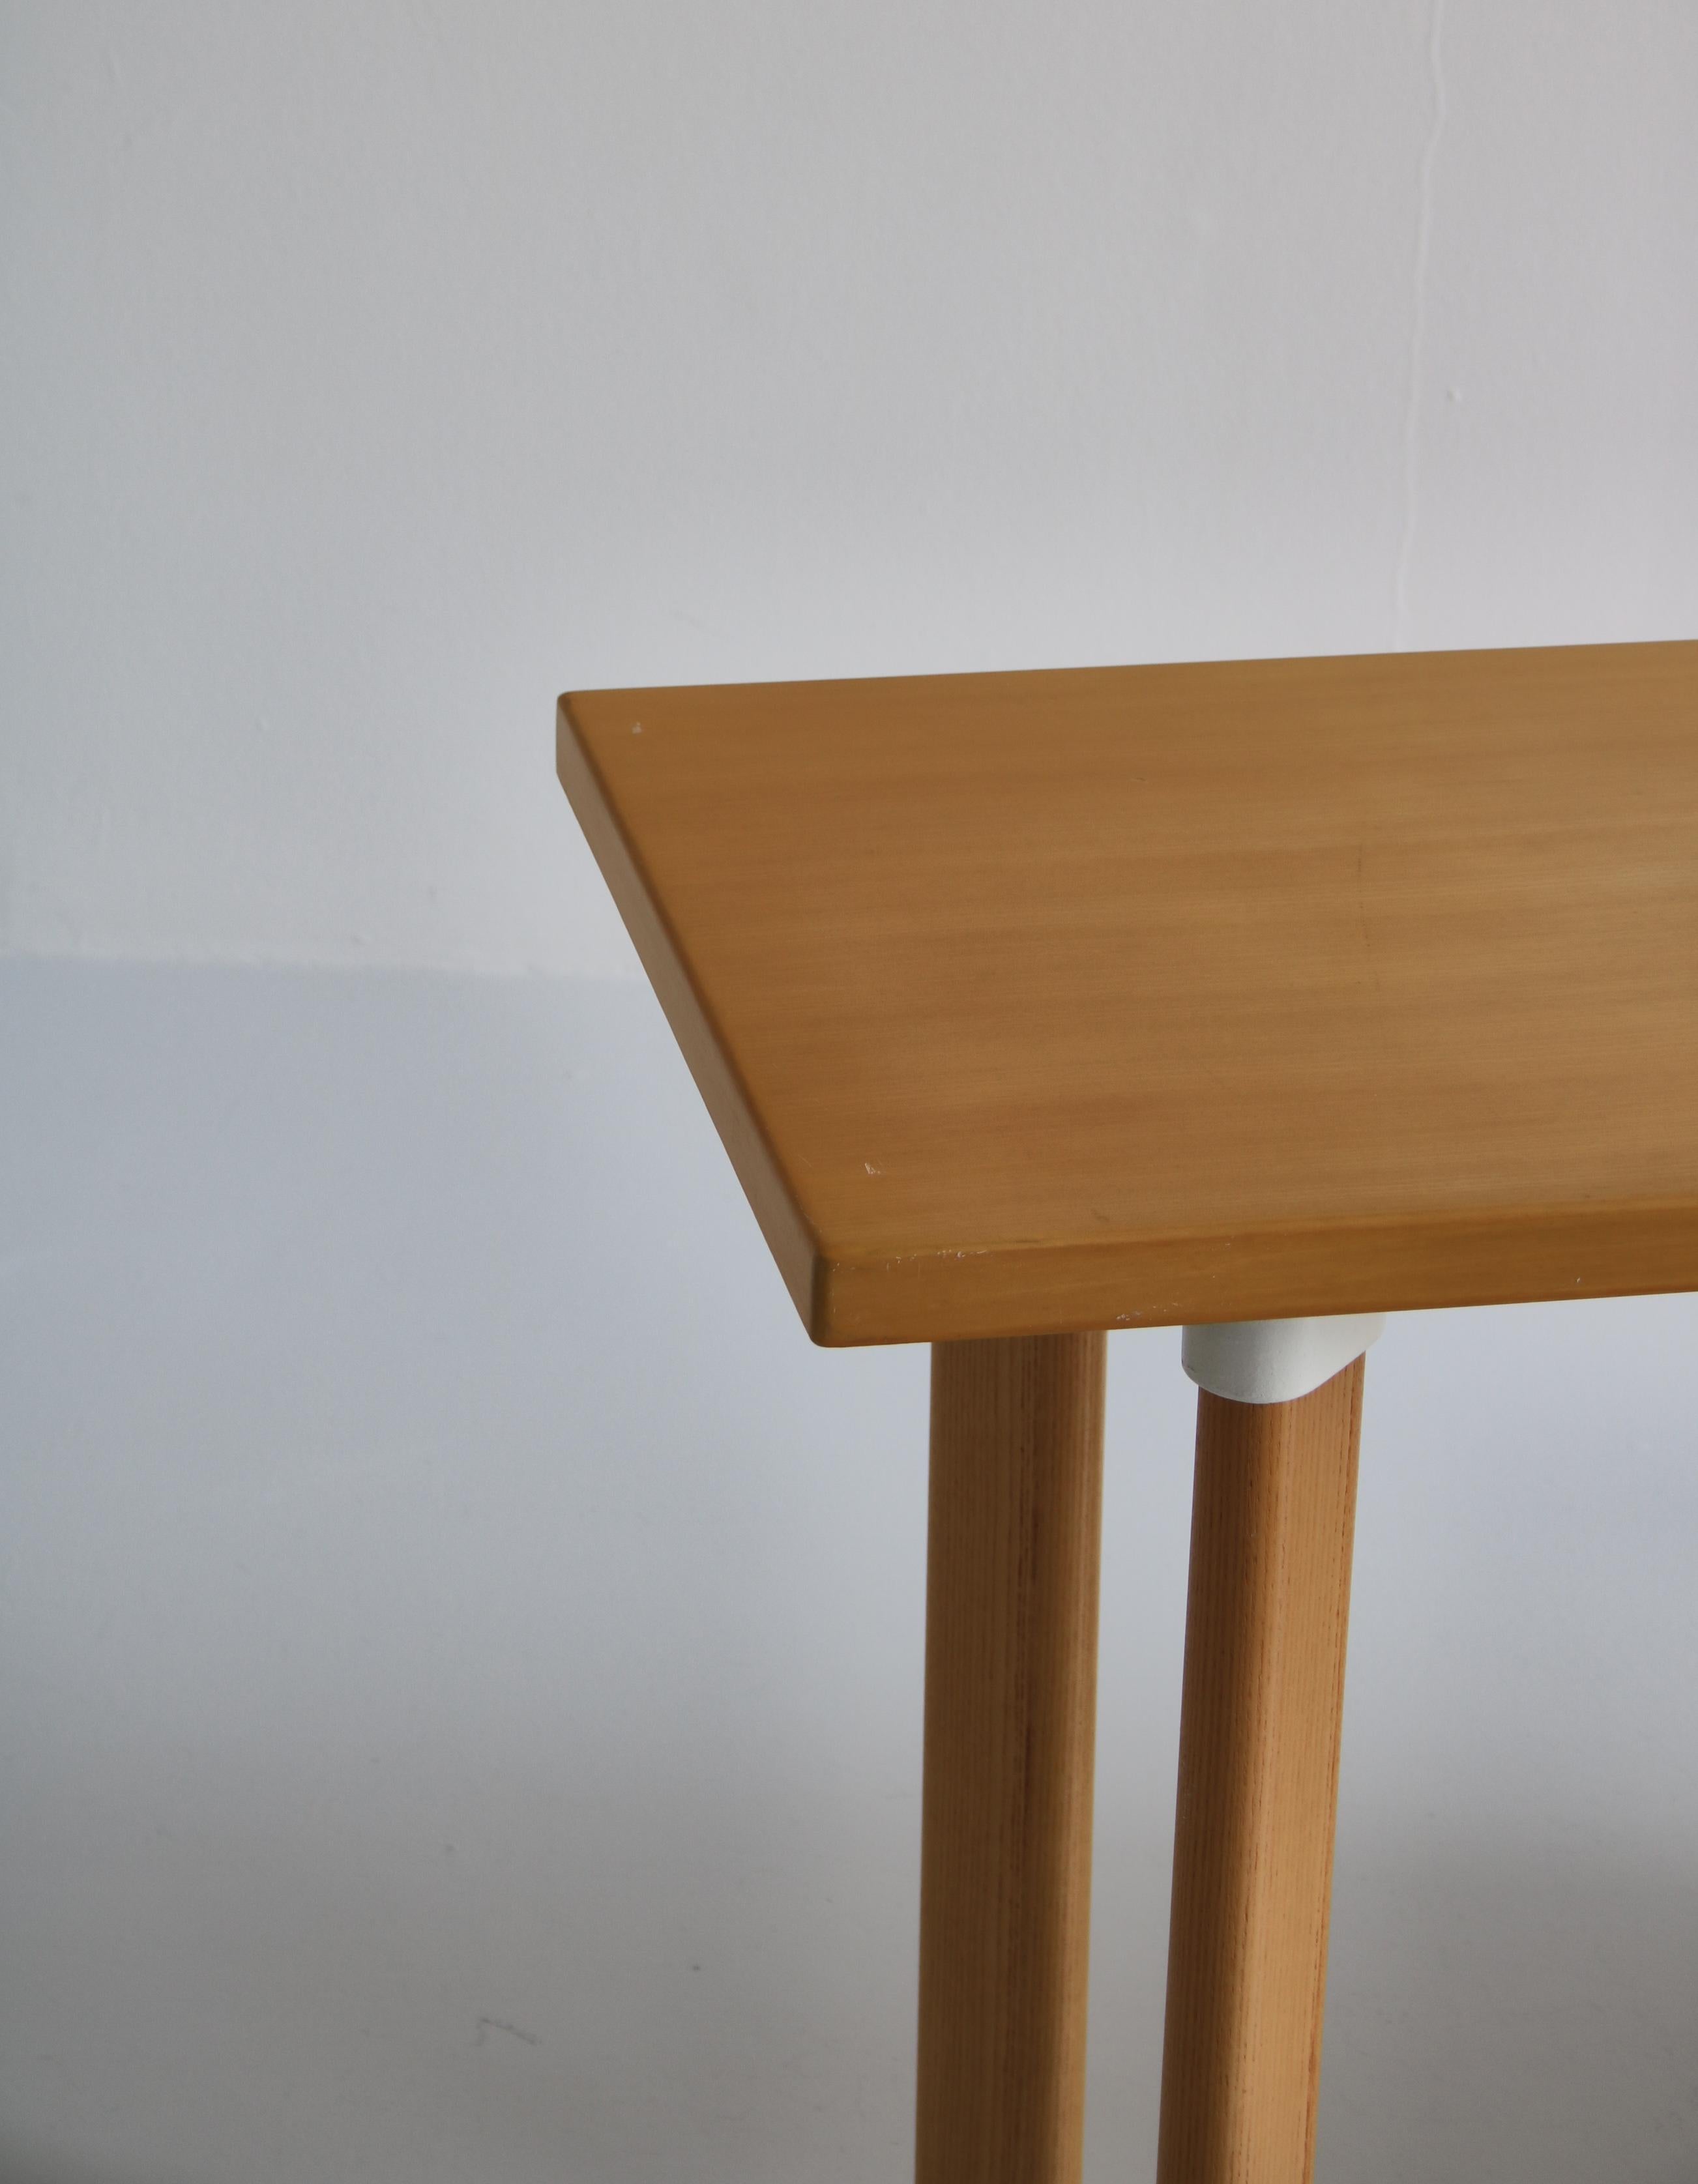 Finnish Alvar Aalto Desk and Chair Model 65, made by Artek, Finland in the 1960s